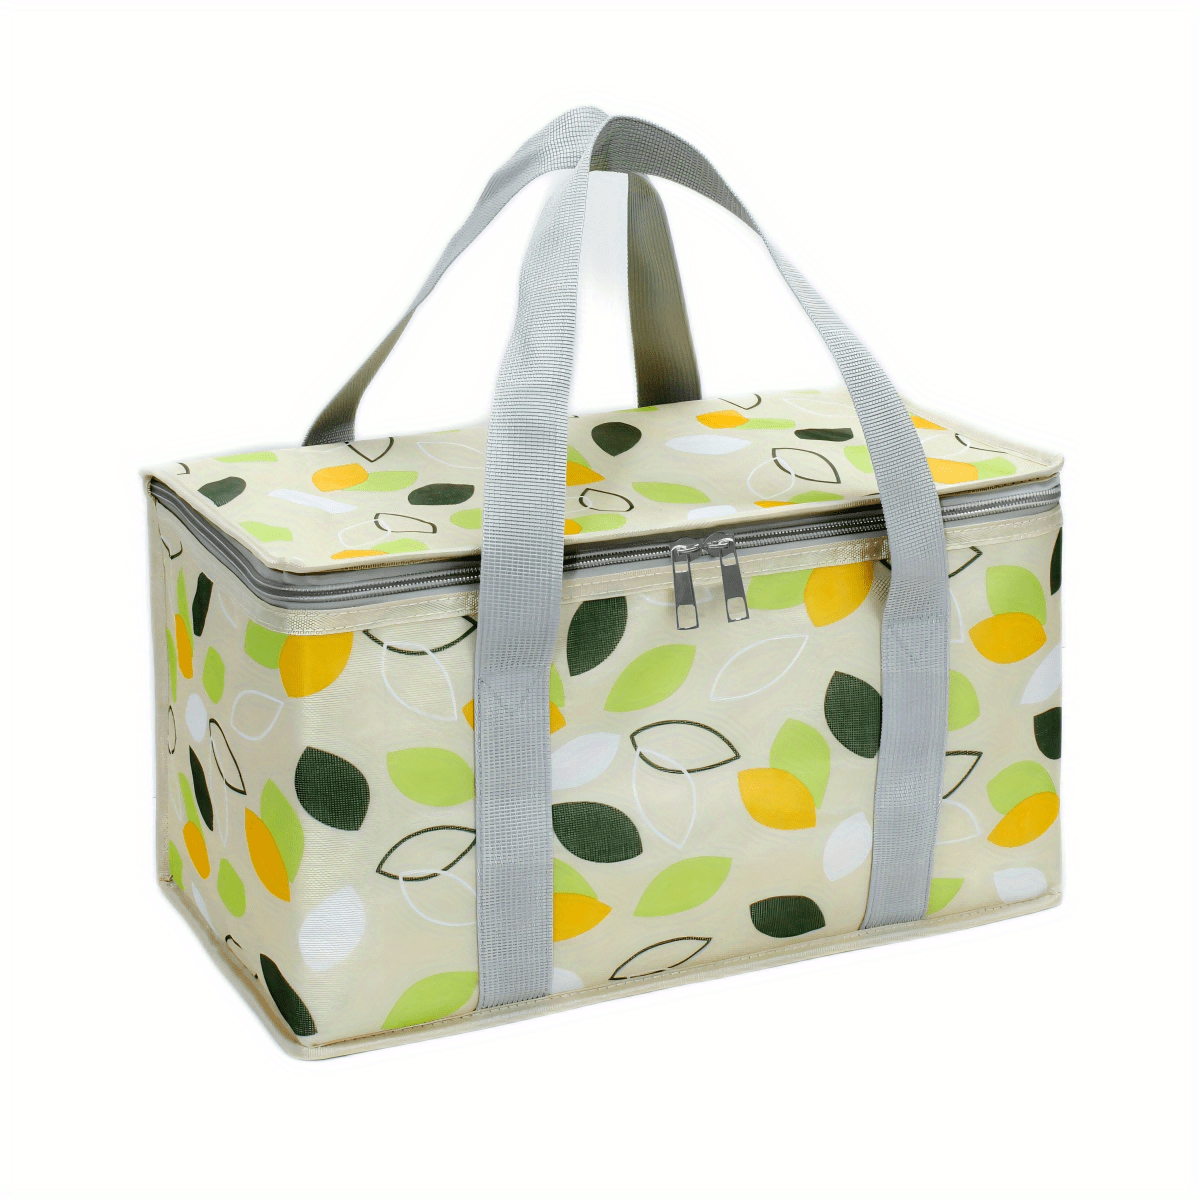 Outdoor Large Picnic Bag, Picnic Basket For Camping, Travel Tote